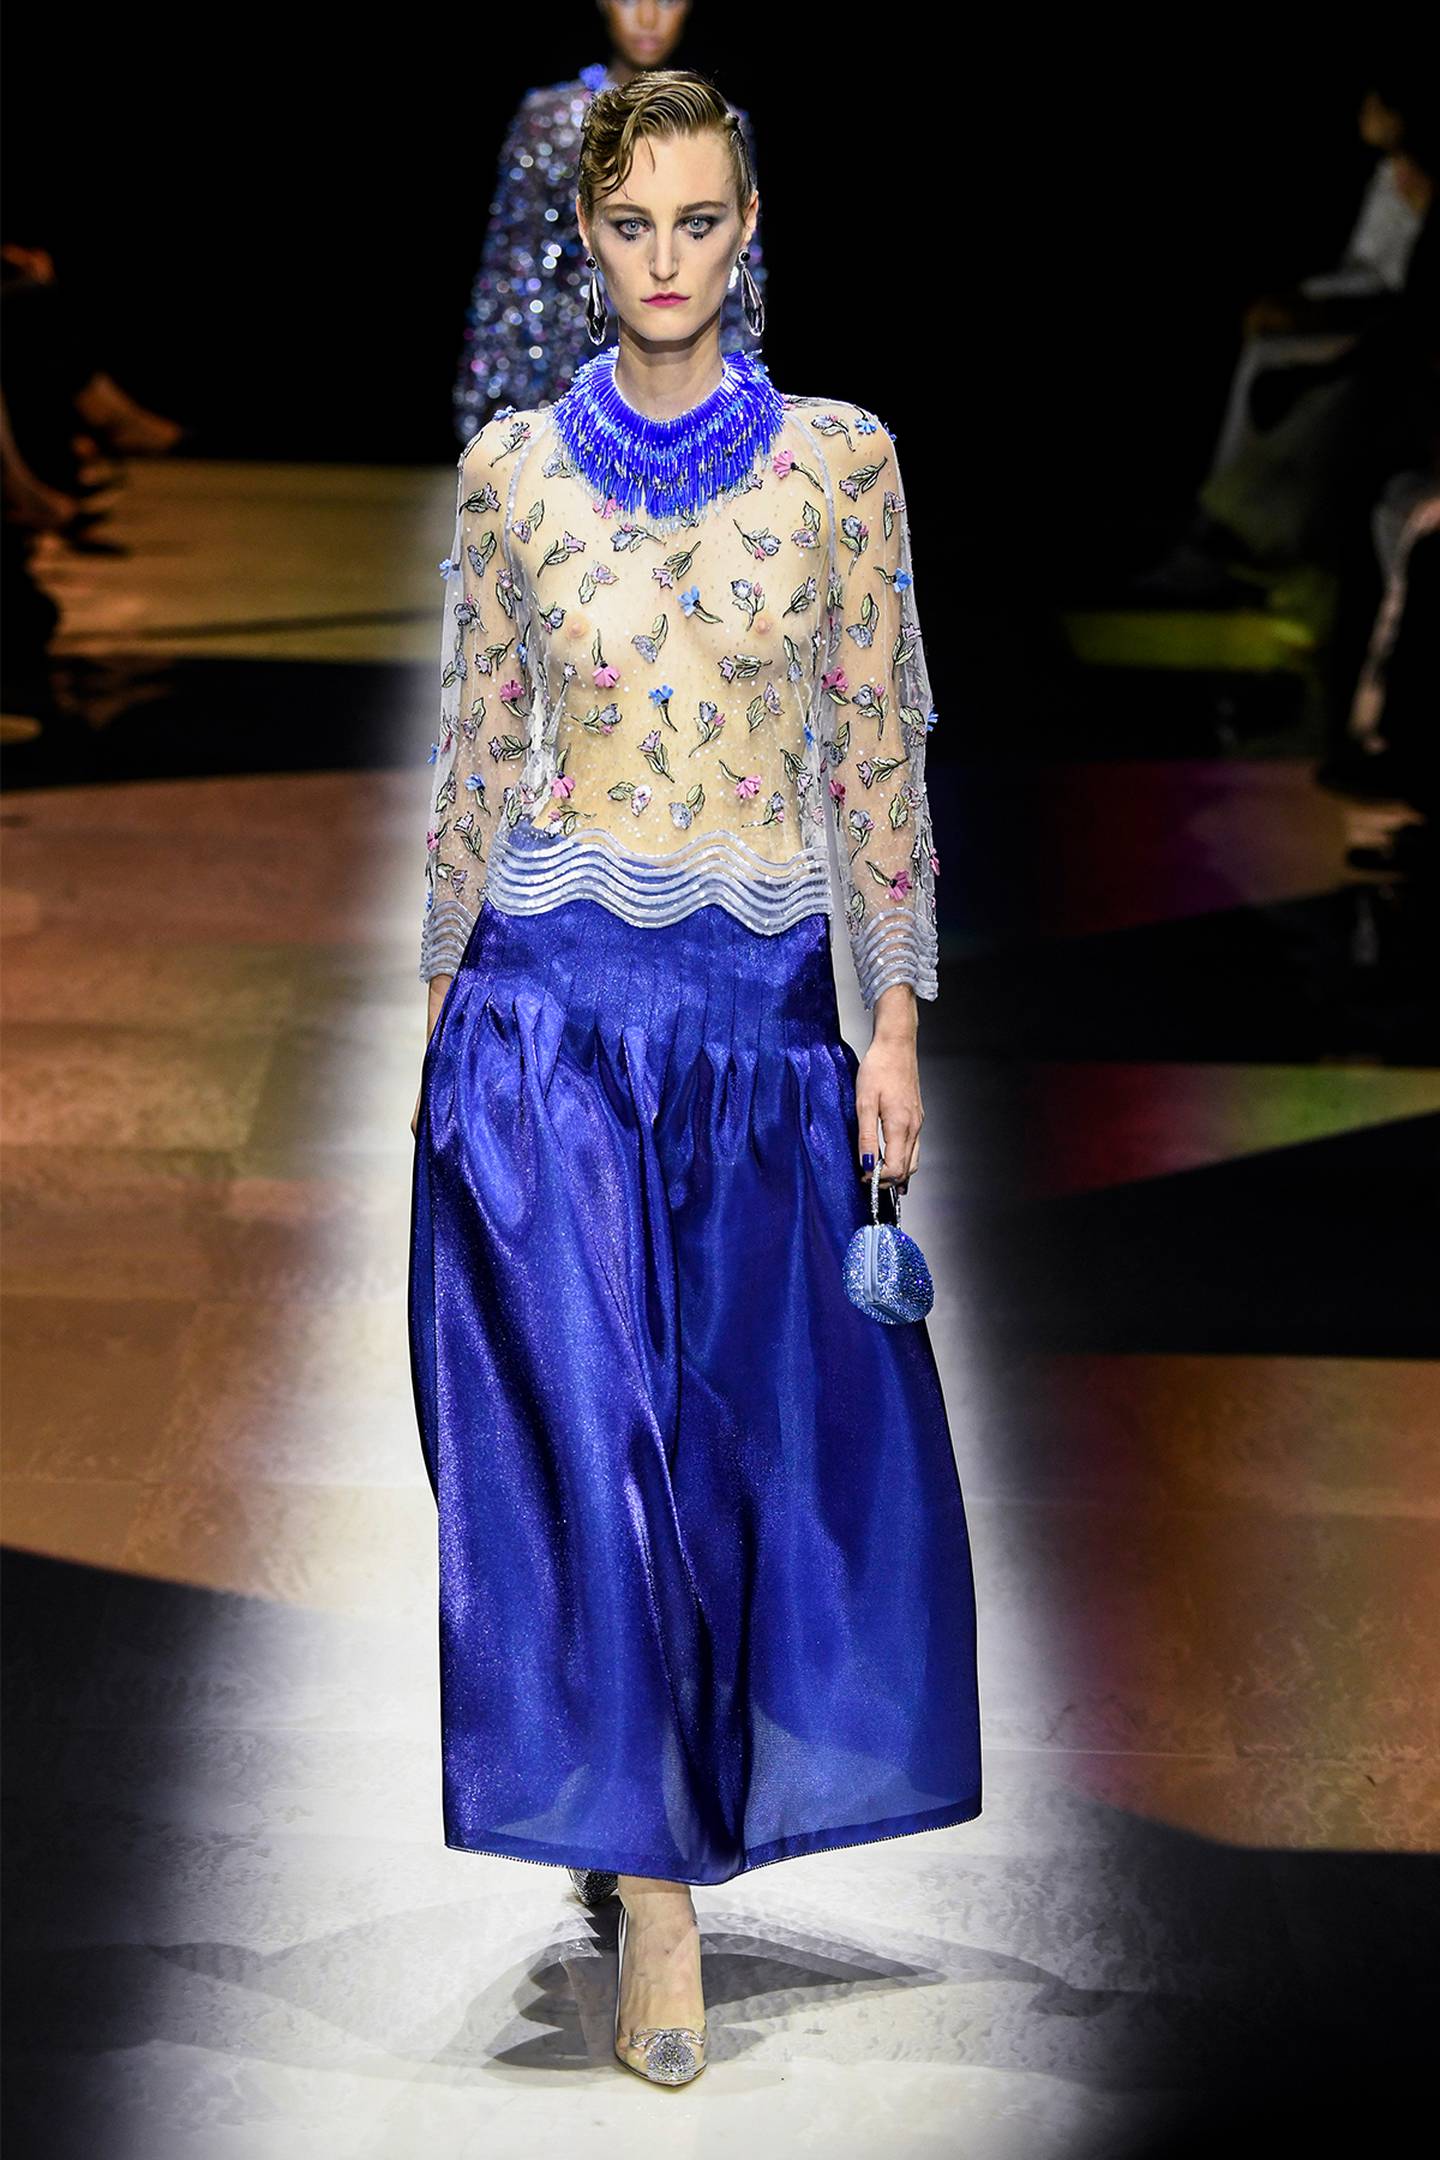 A model wears a mesh embellished long sleeved top, with royal blue details, and a satin blue maxi skirt paired with high heeled shoes.